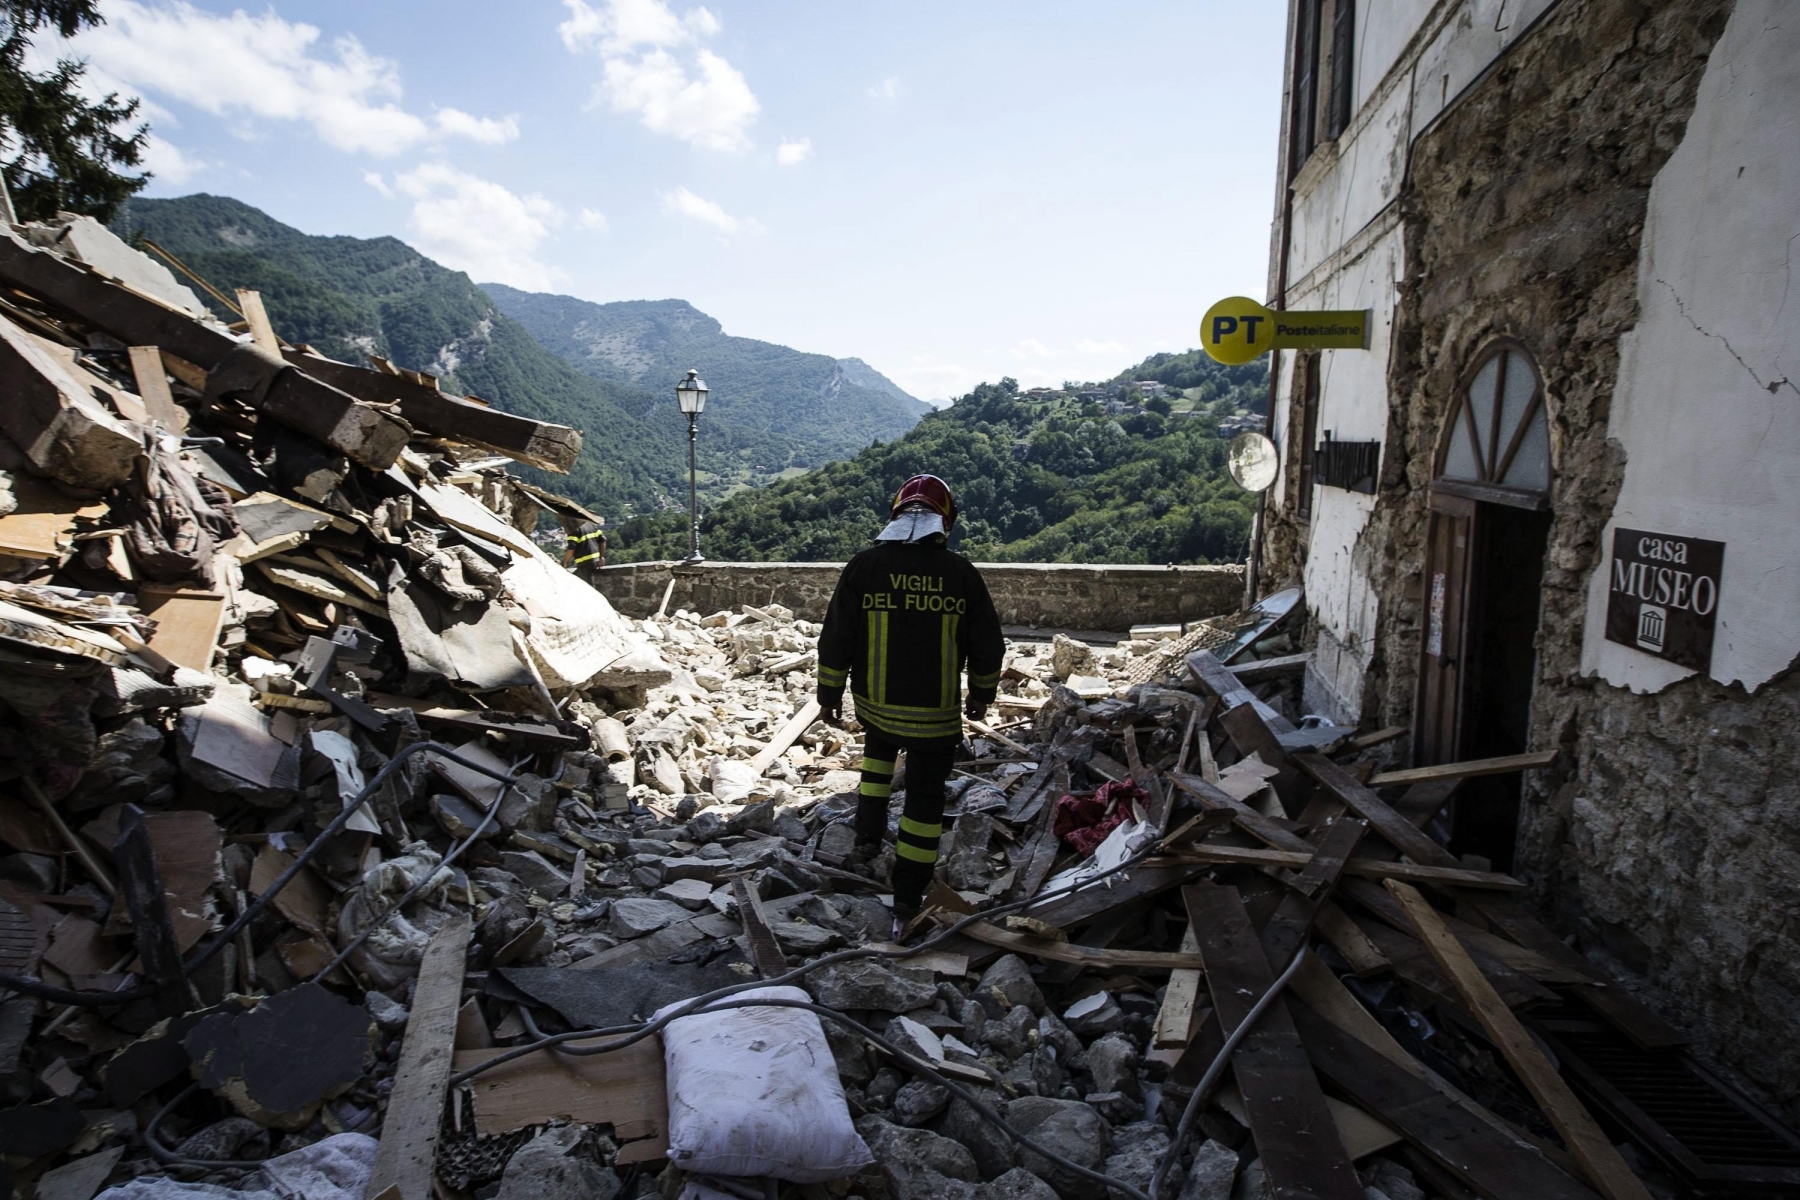 epa05509566 A fireman at work among the rubble of collapsed houses in Arquata, central Italy, 25 August 2016. The provisional death toll from 24 August's earthquake in central Italy has risen to 247, the civil protection agency said on 25 August.  EPA/ANGELO CARCONI ITALY EARTHQUAKE